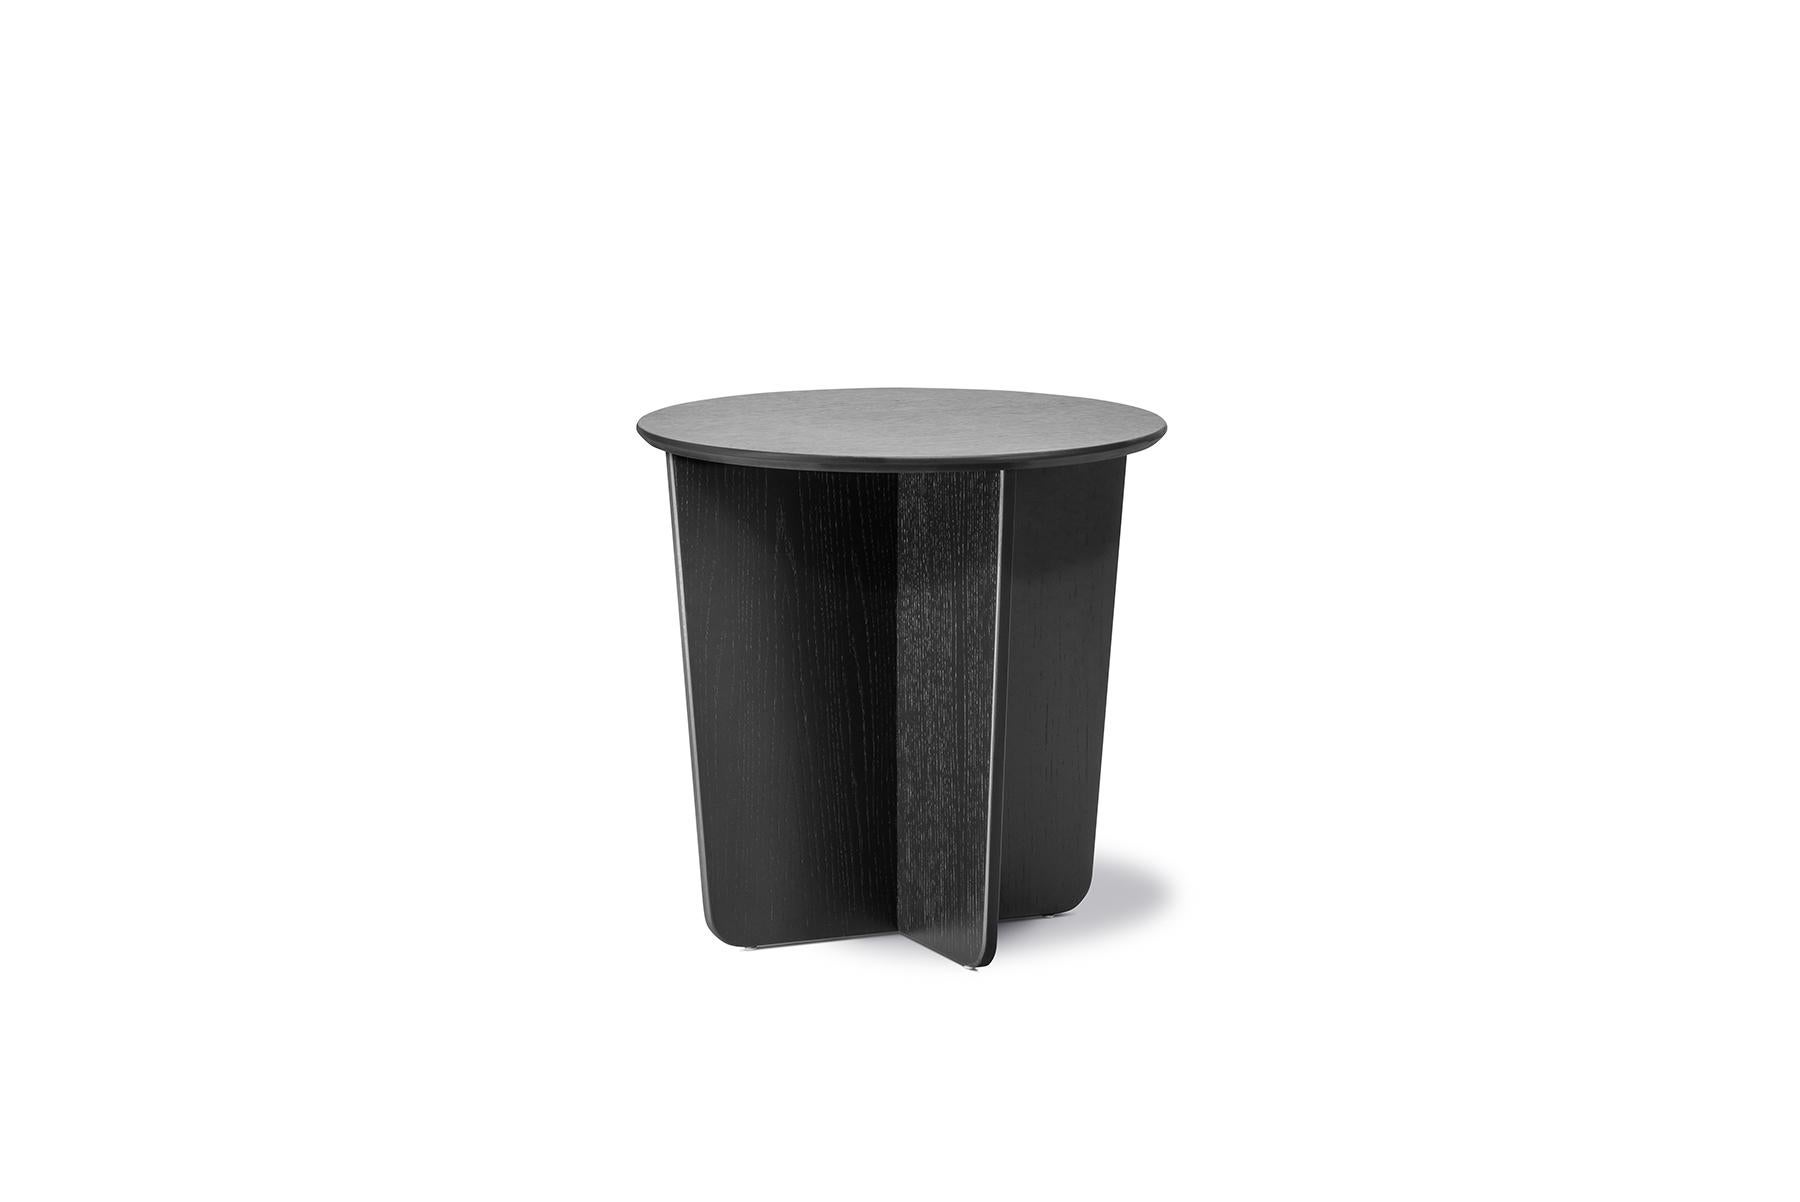 Space Copenhagen tableau side table, circular
Tableau celebrates the beauty of natural wood and the skilled craft required to work it. Featuring a circular or rectangular oak top on a matching x-shaped base, the pairing of shapes creates an